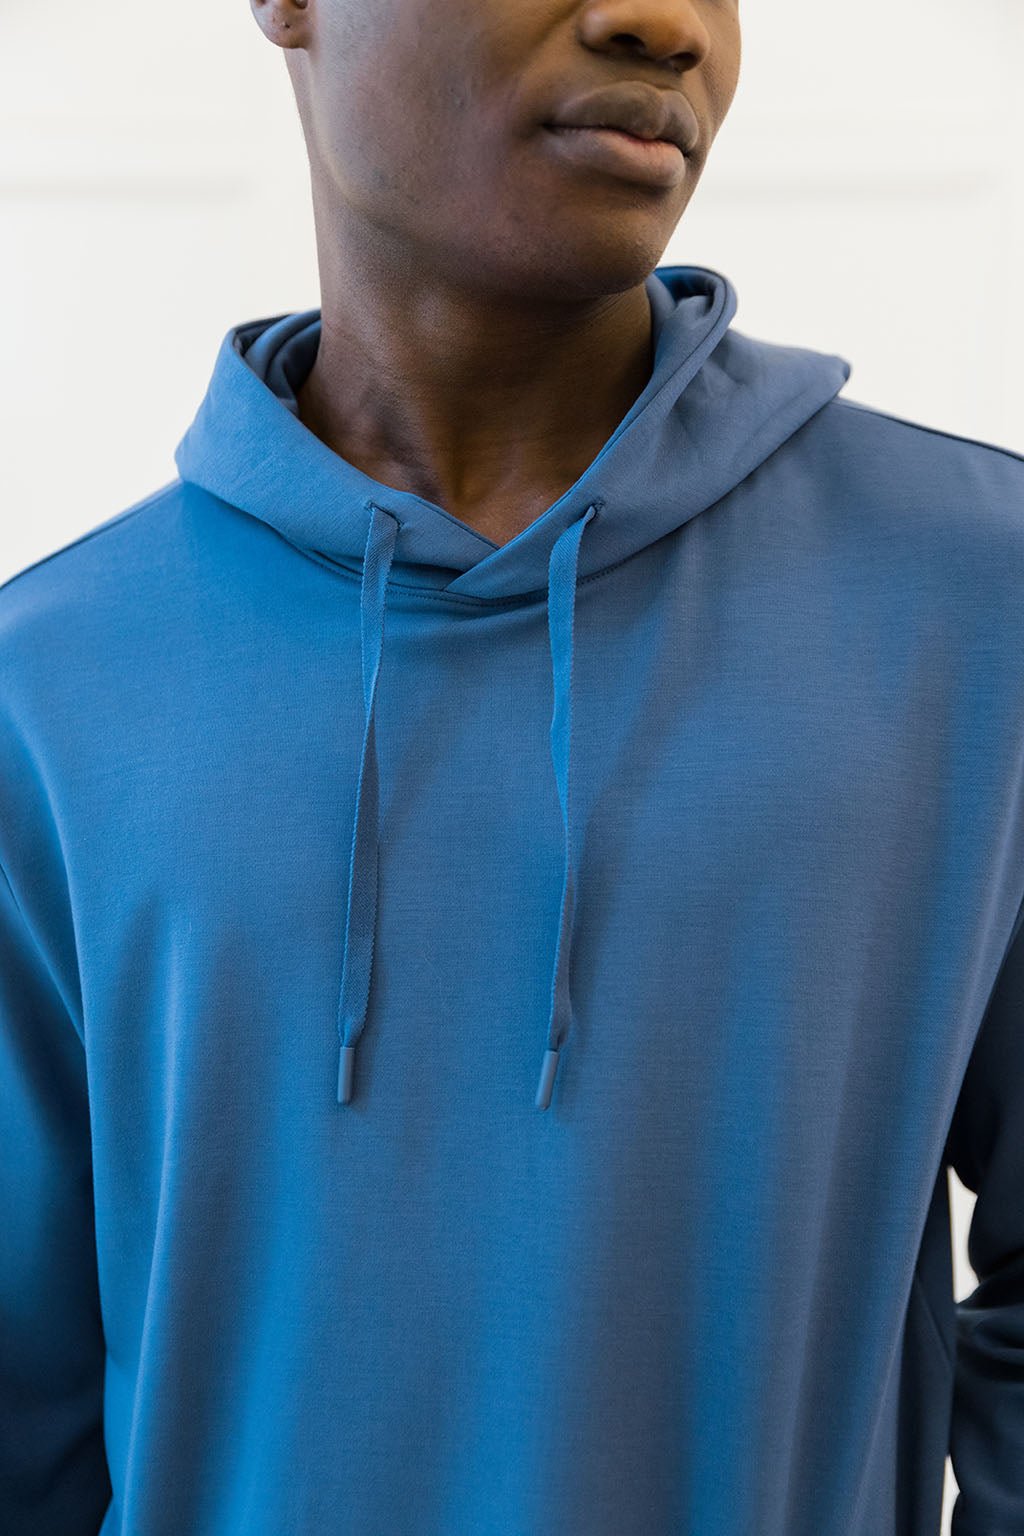 Cobalt Bamboo Hoodie worn by a man standing in front of white background.